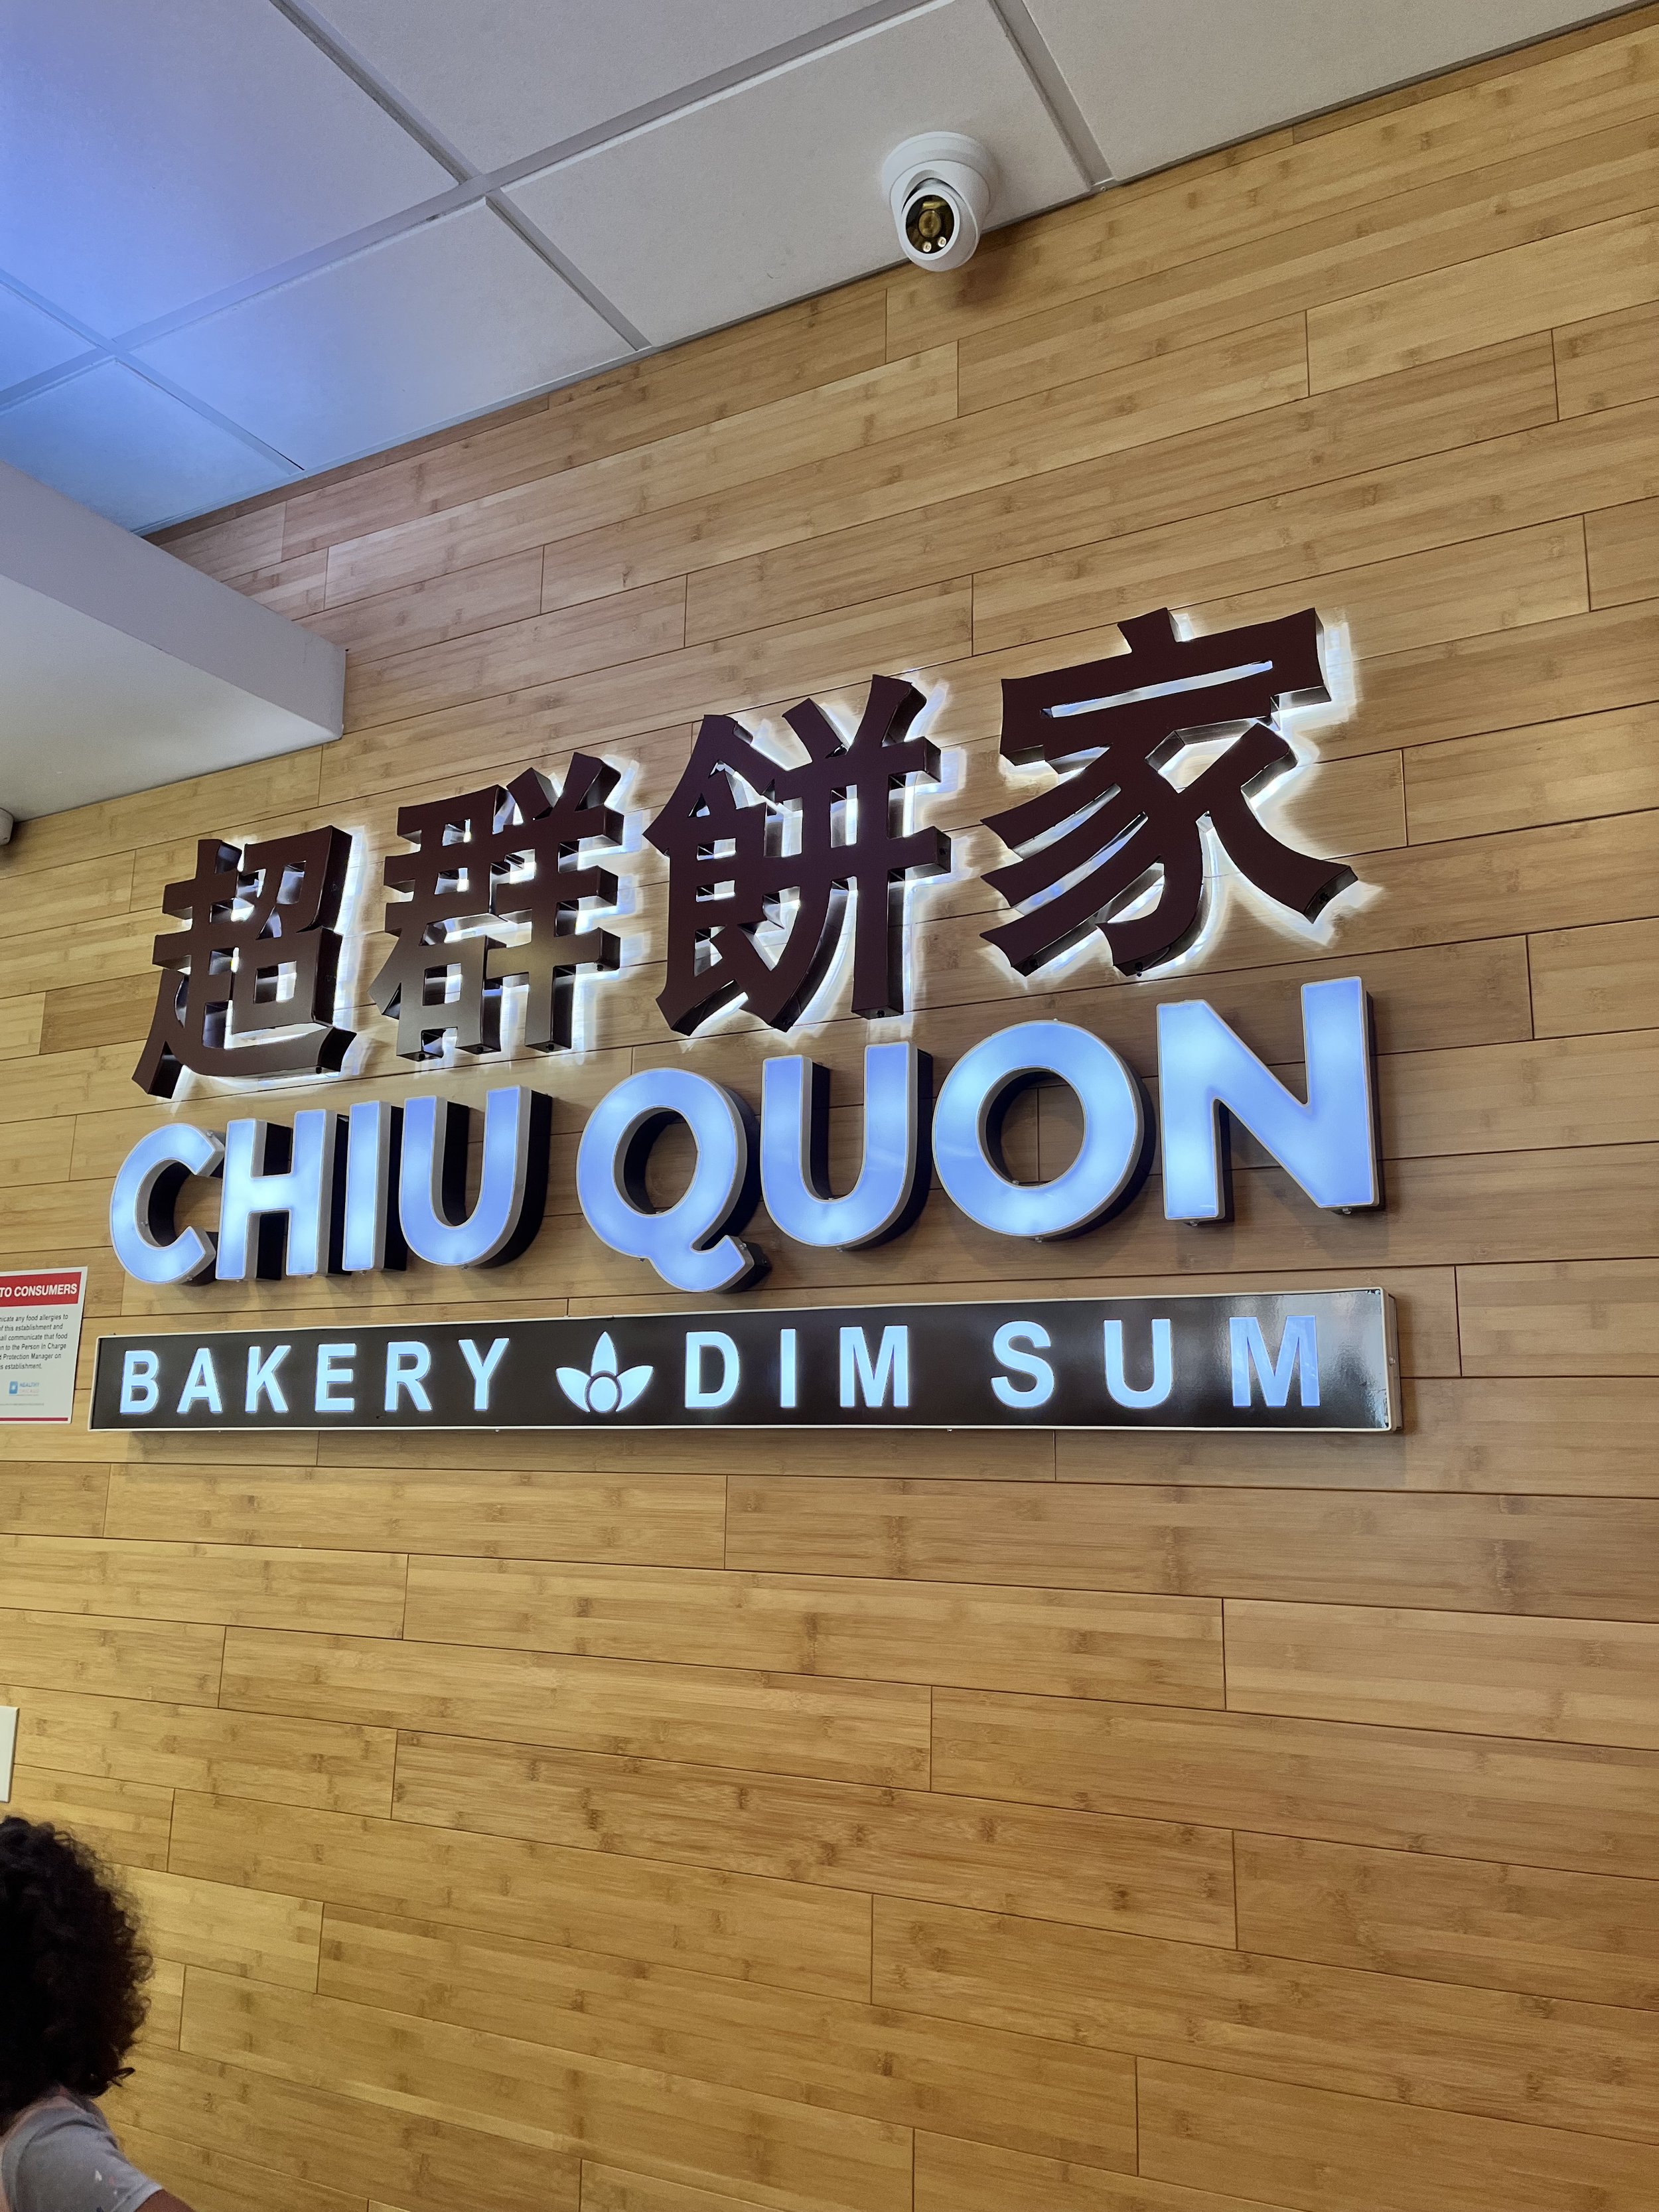 Chiu Quon Bakery and Dim Sum food inside sign Chinatown Chicago Illinois.jpg